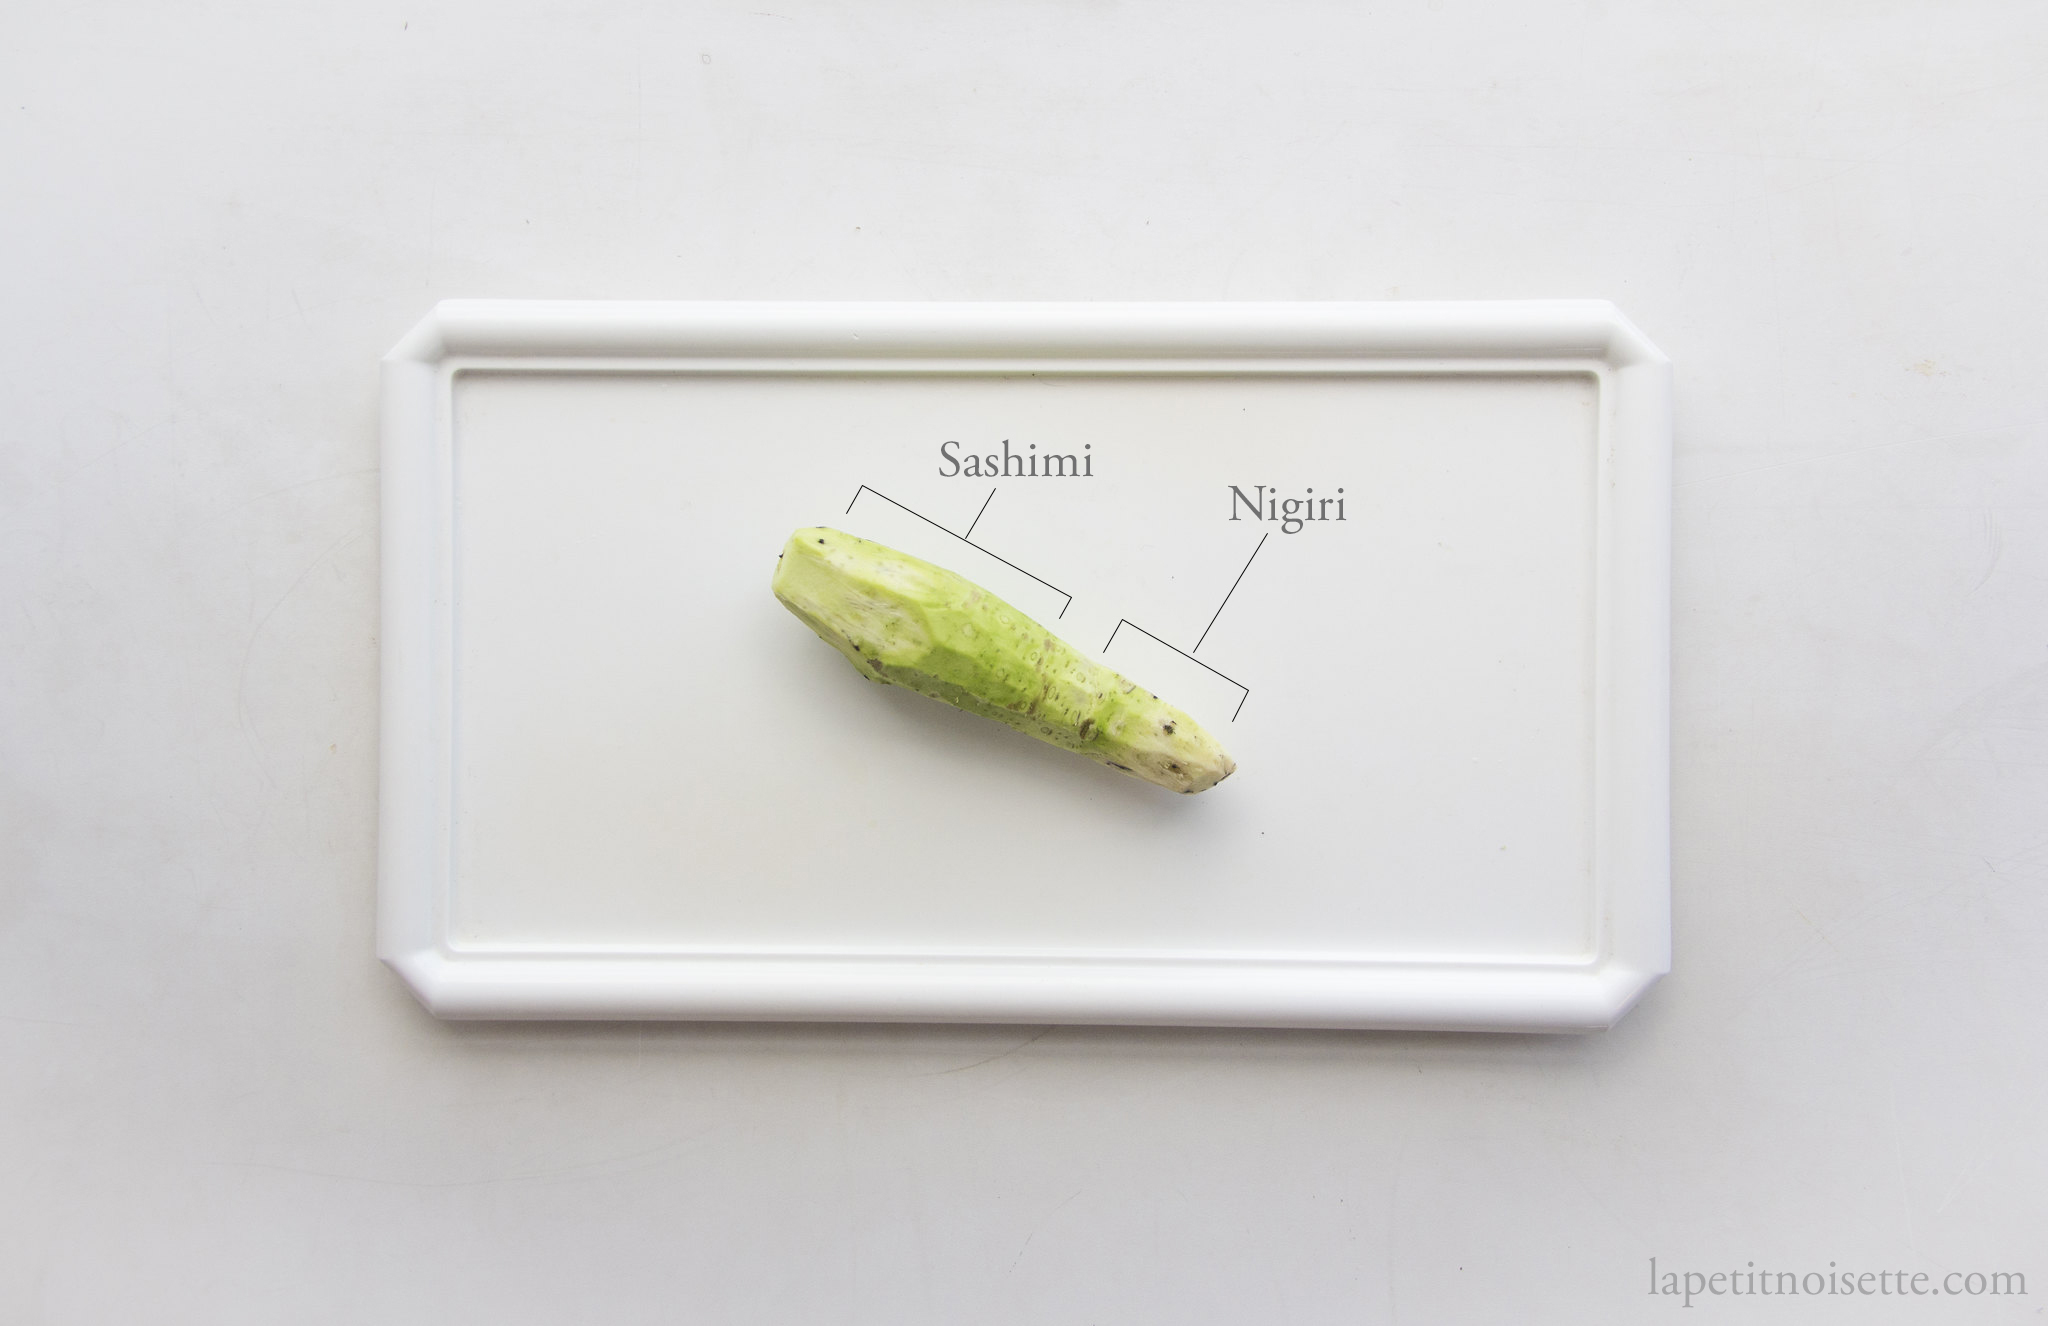 Different parts of a wasabi used in sushi making.